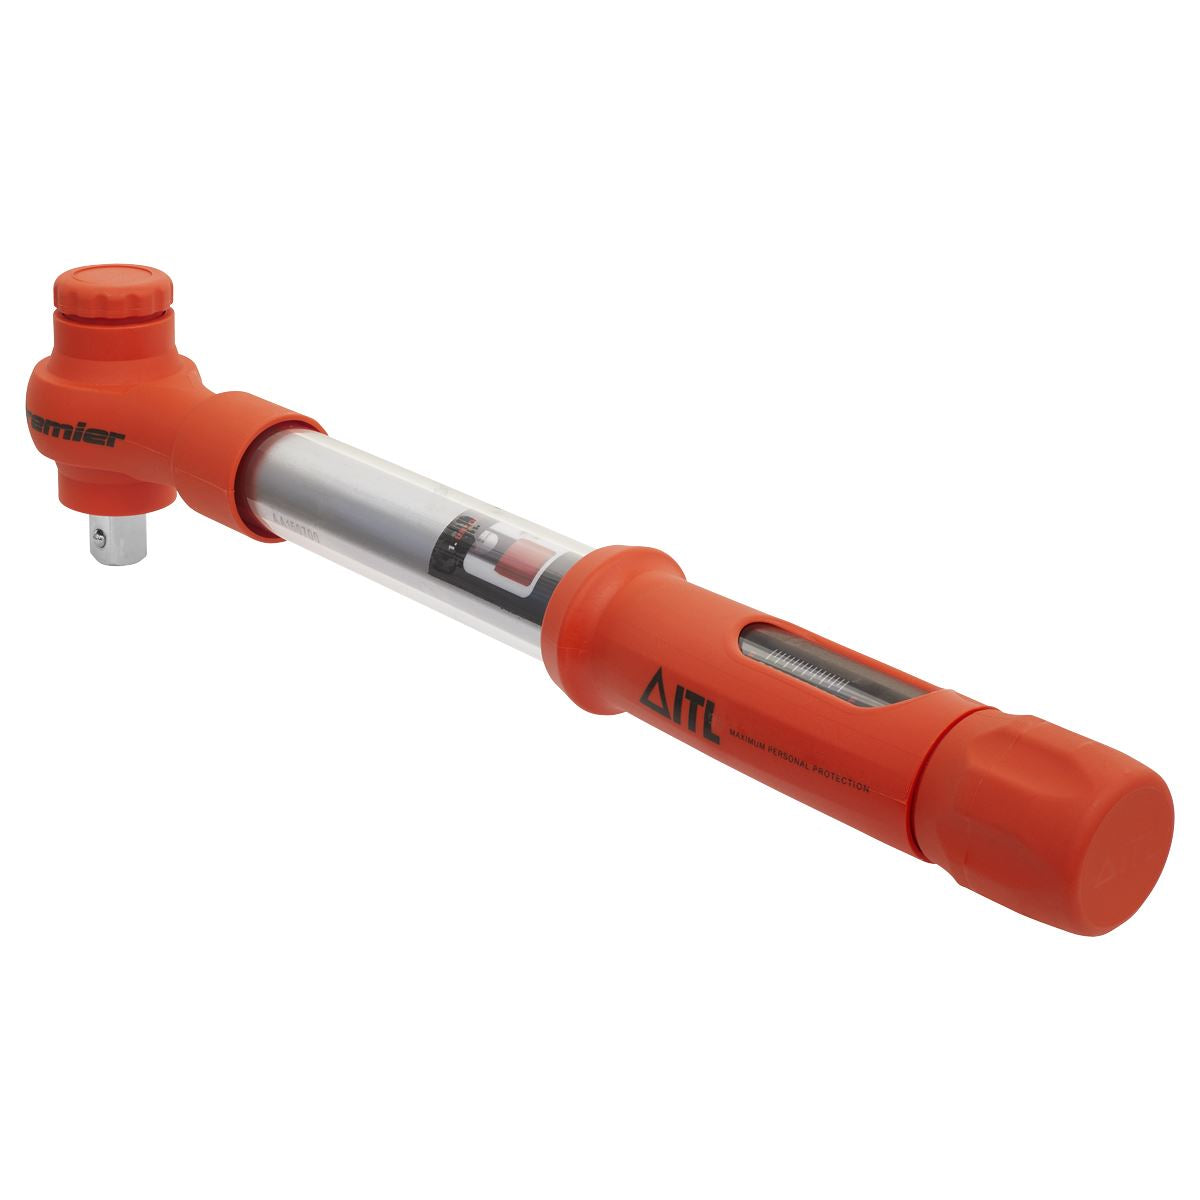 Sealey Premier Torque Wrench Insulated 1/2"Sq Drive 20-100Nm